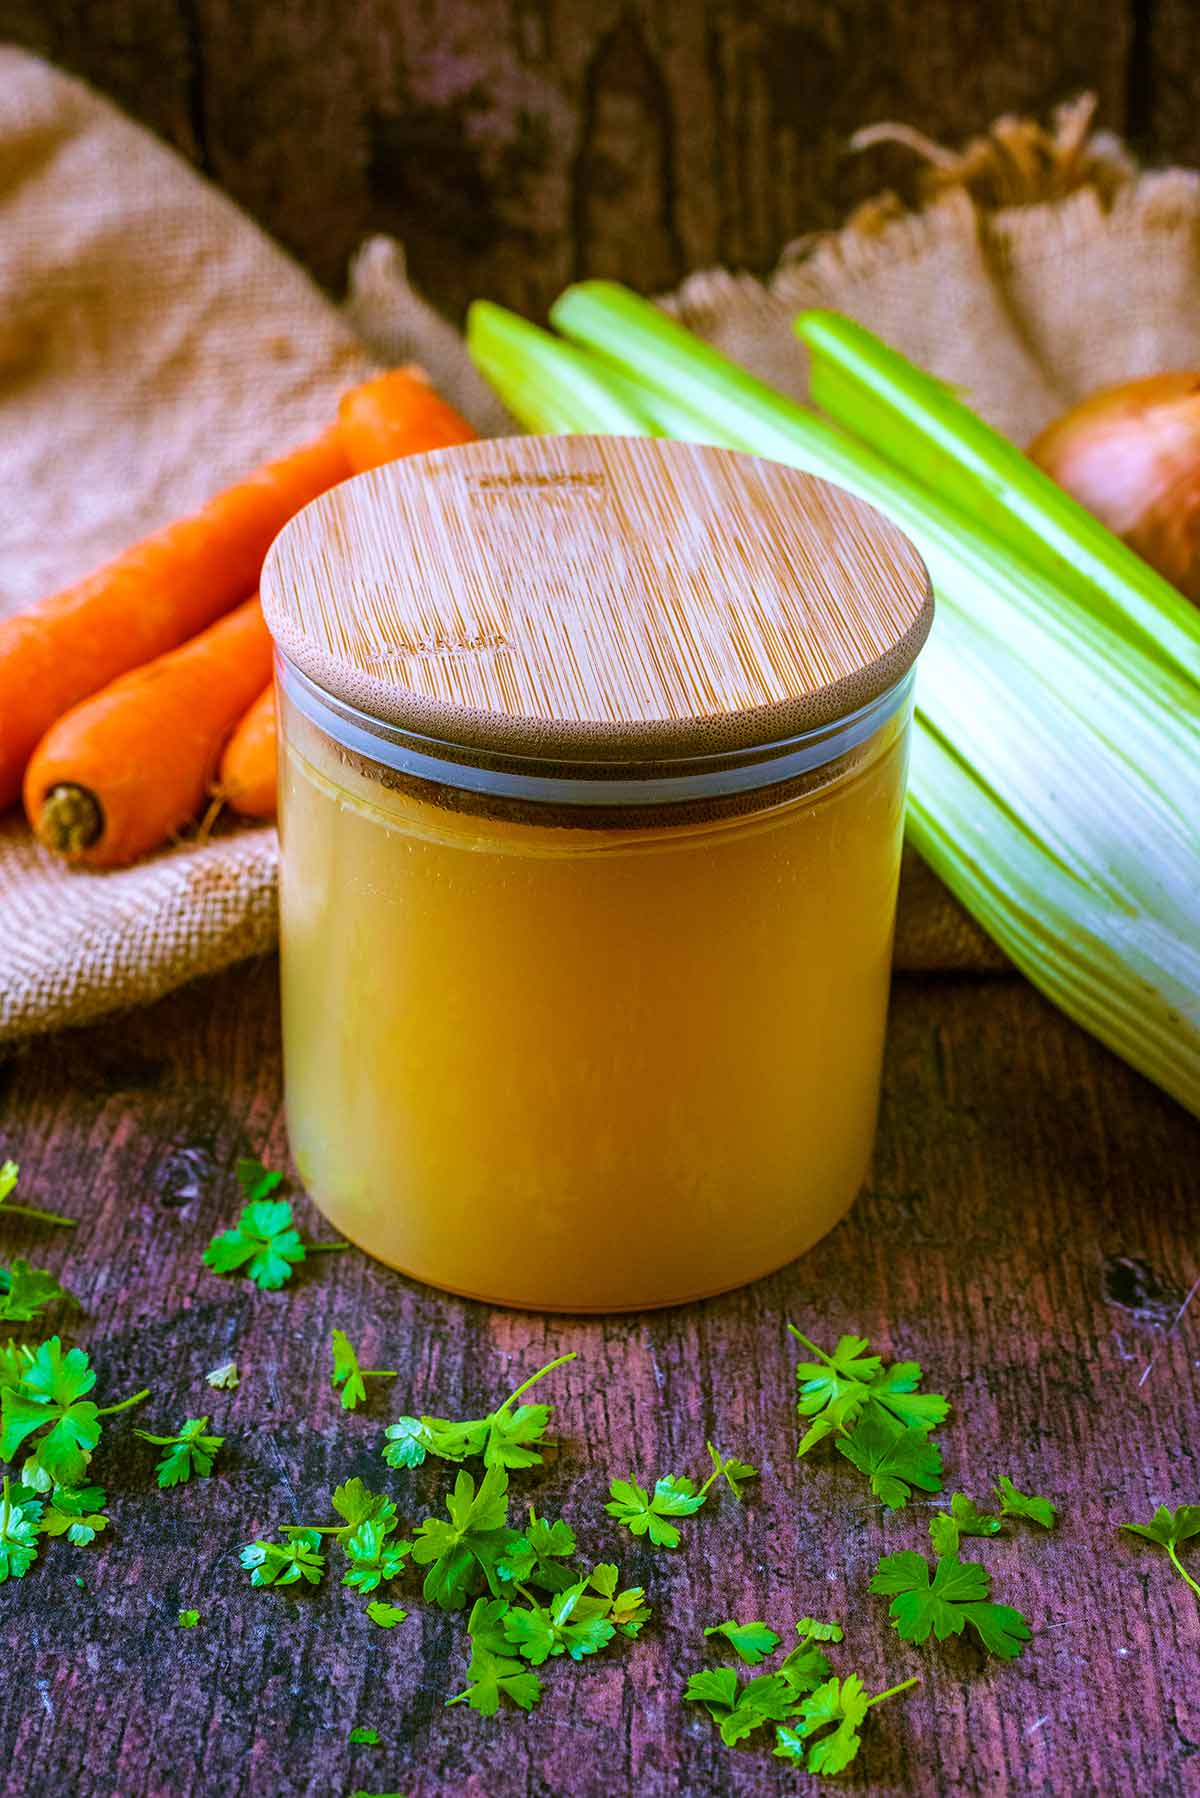 Chicken stock in a jar in front of some carrots, celery and an onion.